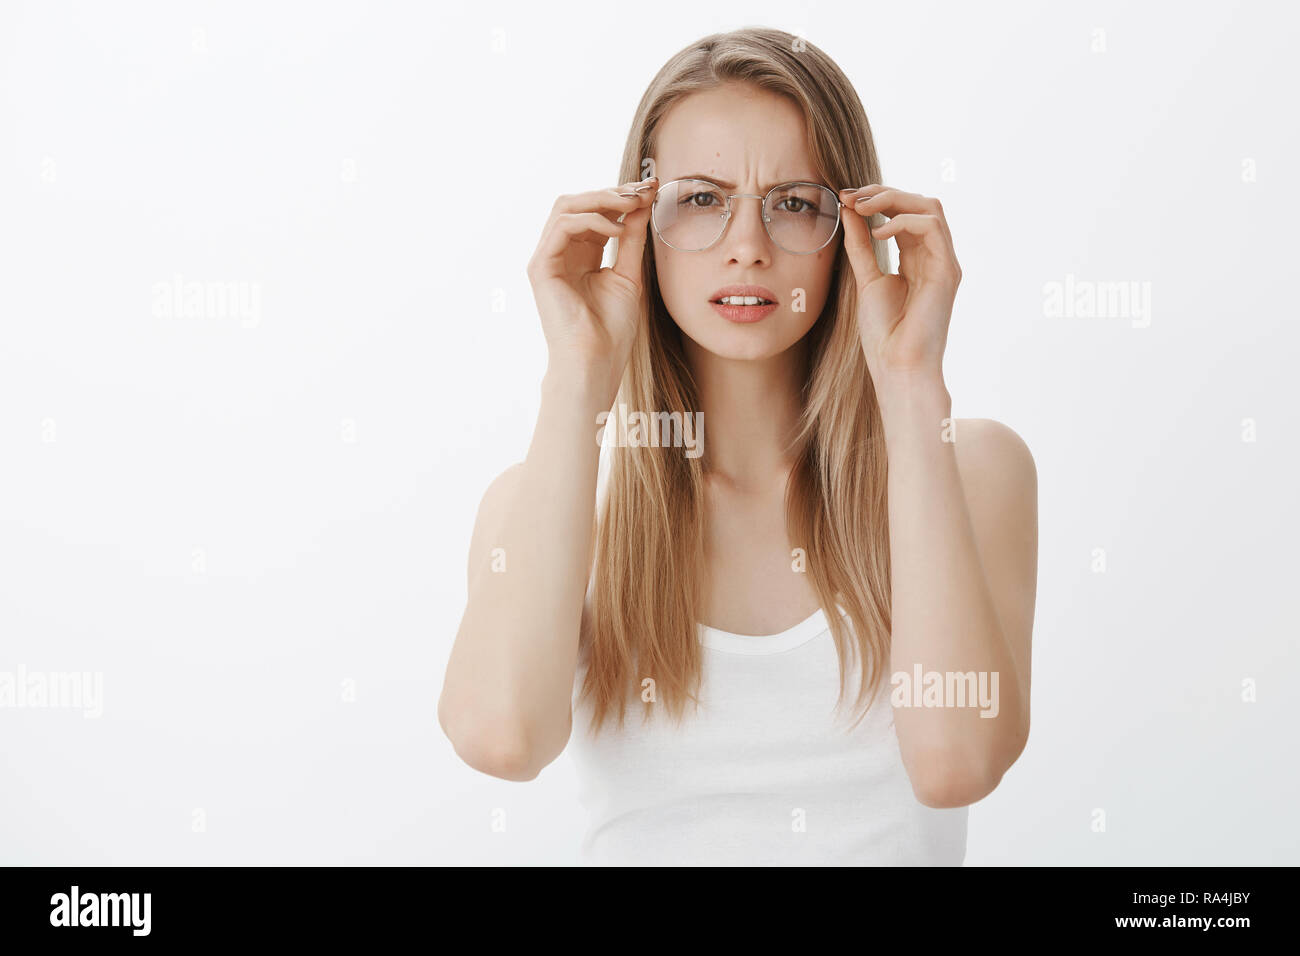 Girl cannot read sign putting on glasses squinting and frowning as looking focused at camera, trying understand what written having problems with sight standing clueless and intense over gray wall Stock Photo